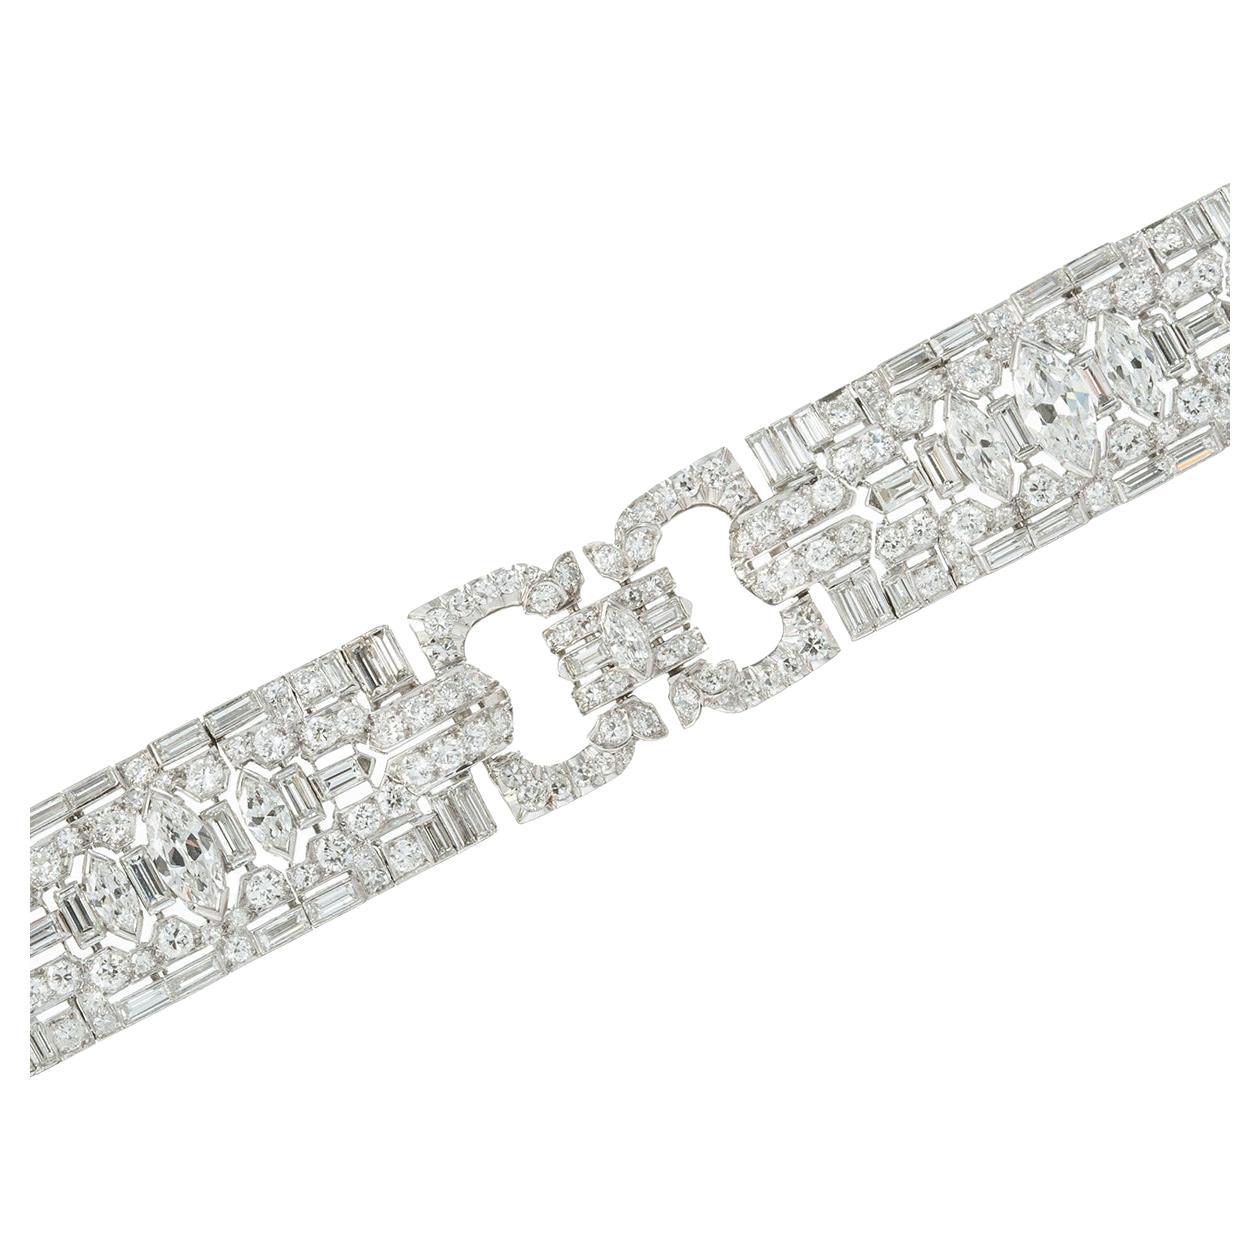 Very fine Art Deco diamond panel link bracelet, set with marquise-shaped, baguette-cut and circular-cut diamonds.  Handmade in platinum.  Diamonds weighing approximately 7.50 total carats (the three largest central marquise-shaped diamonds weighing